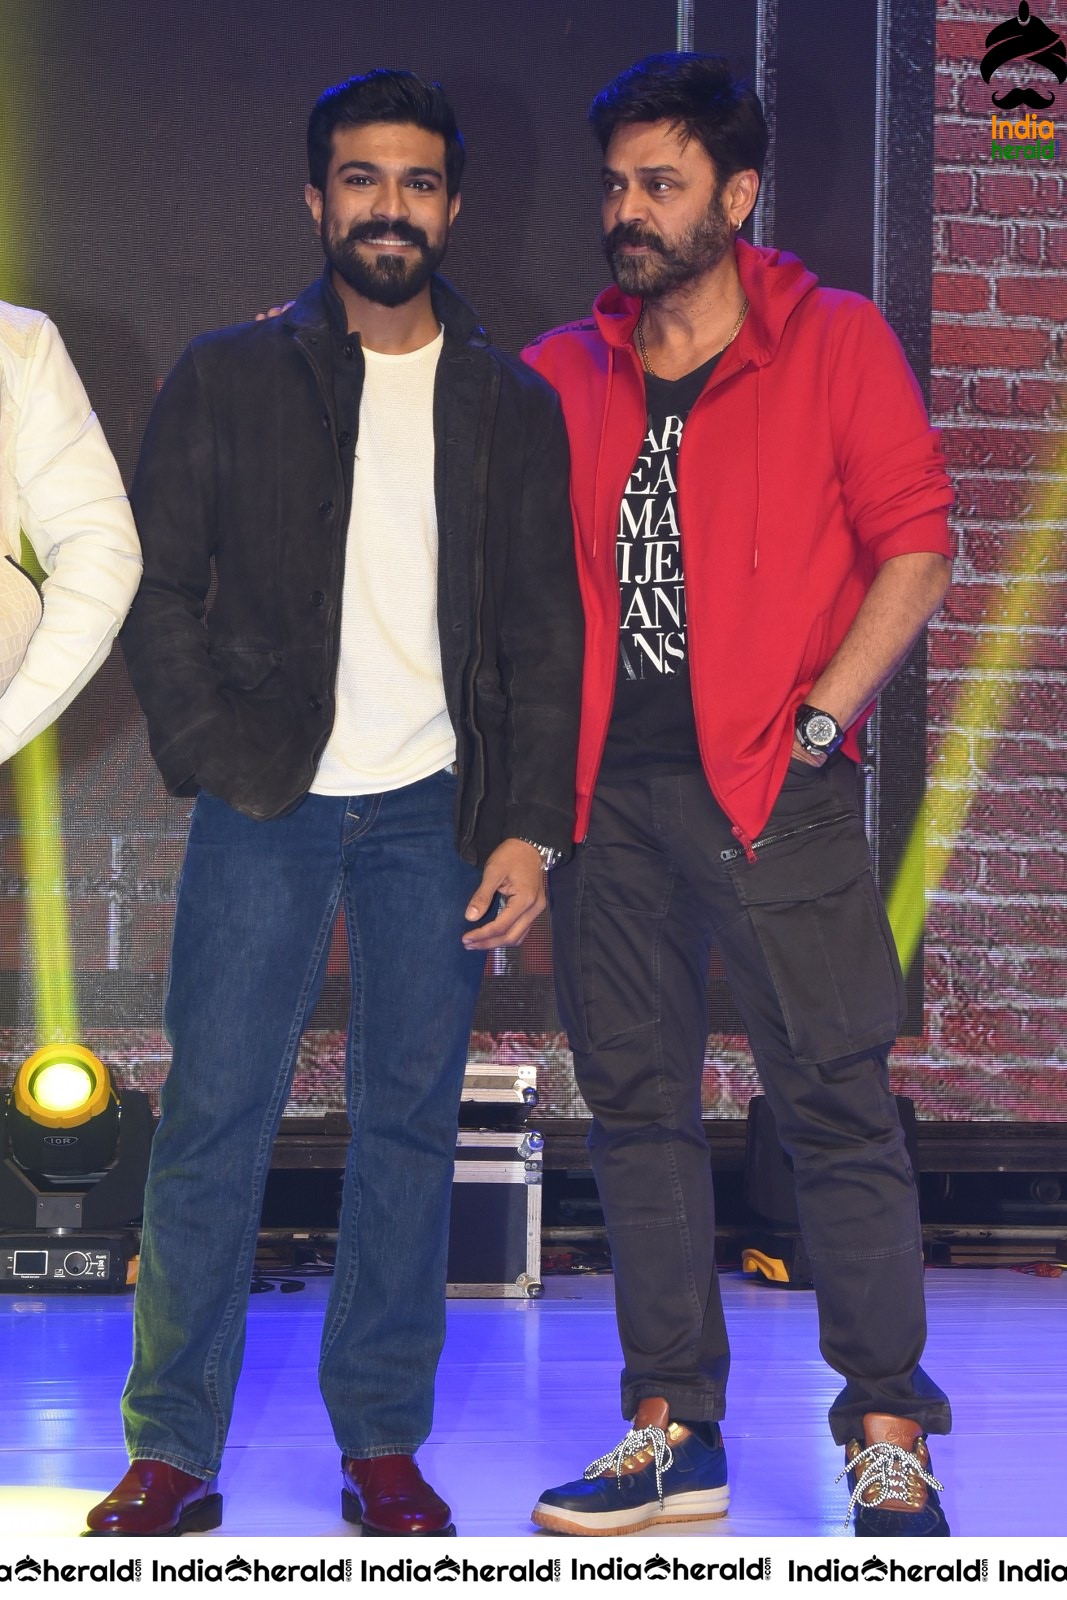 Actors Ram Charan and Venkatesh Seen Together On the Stage Set 2